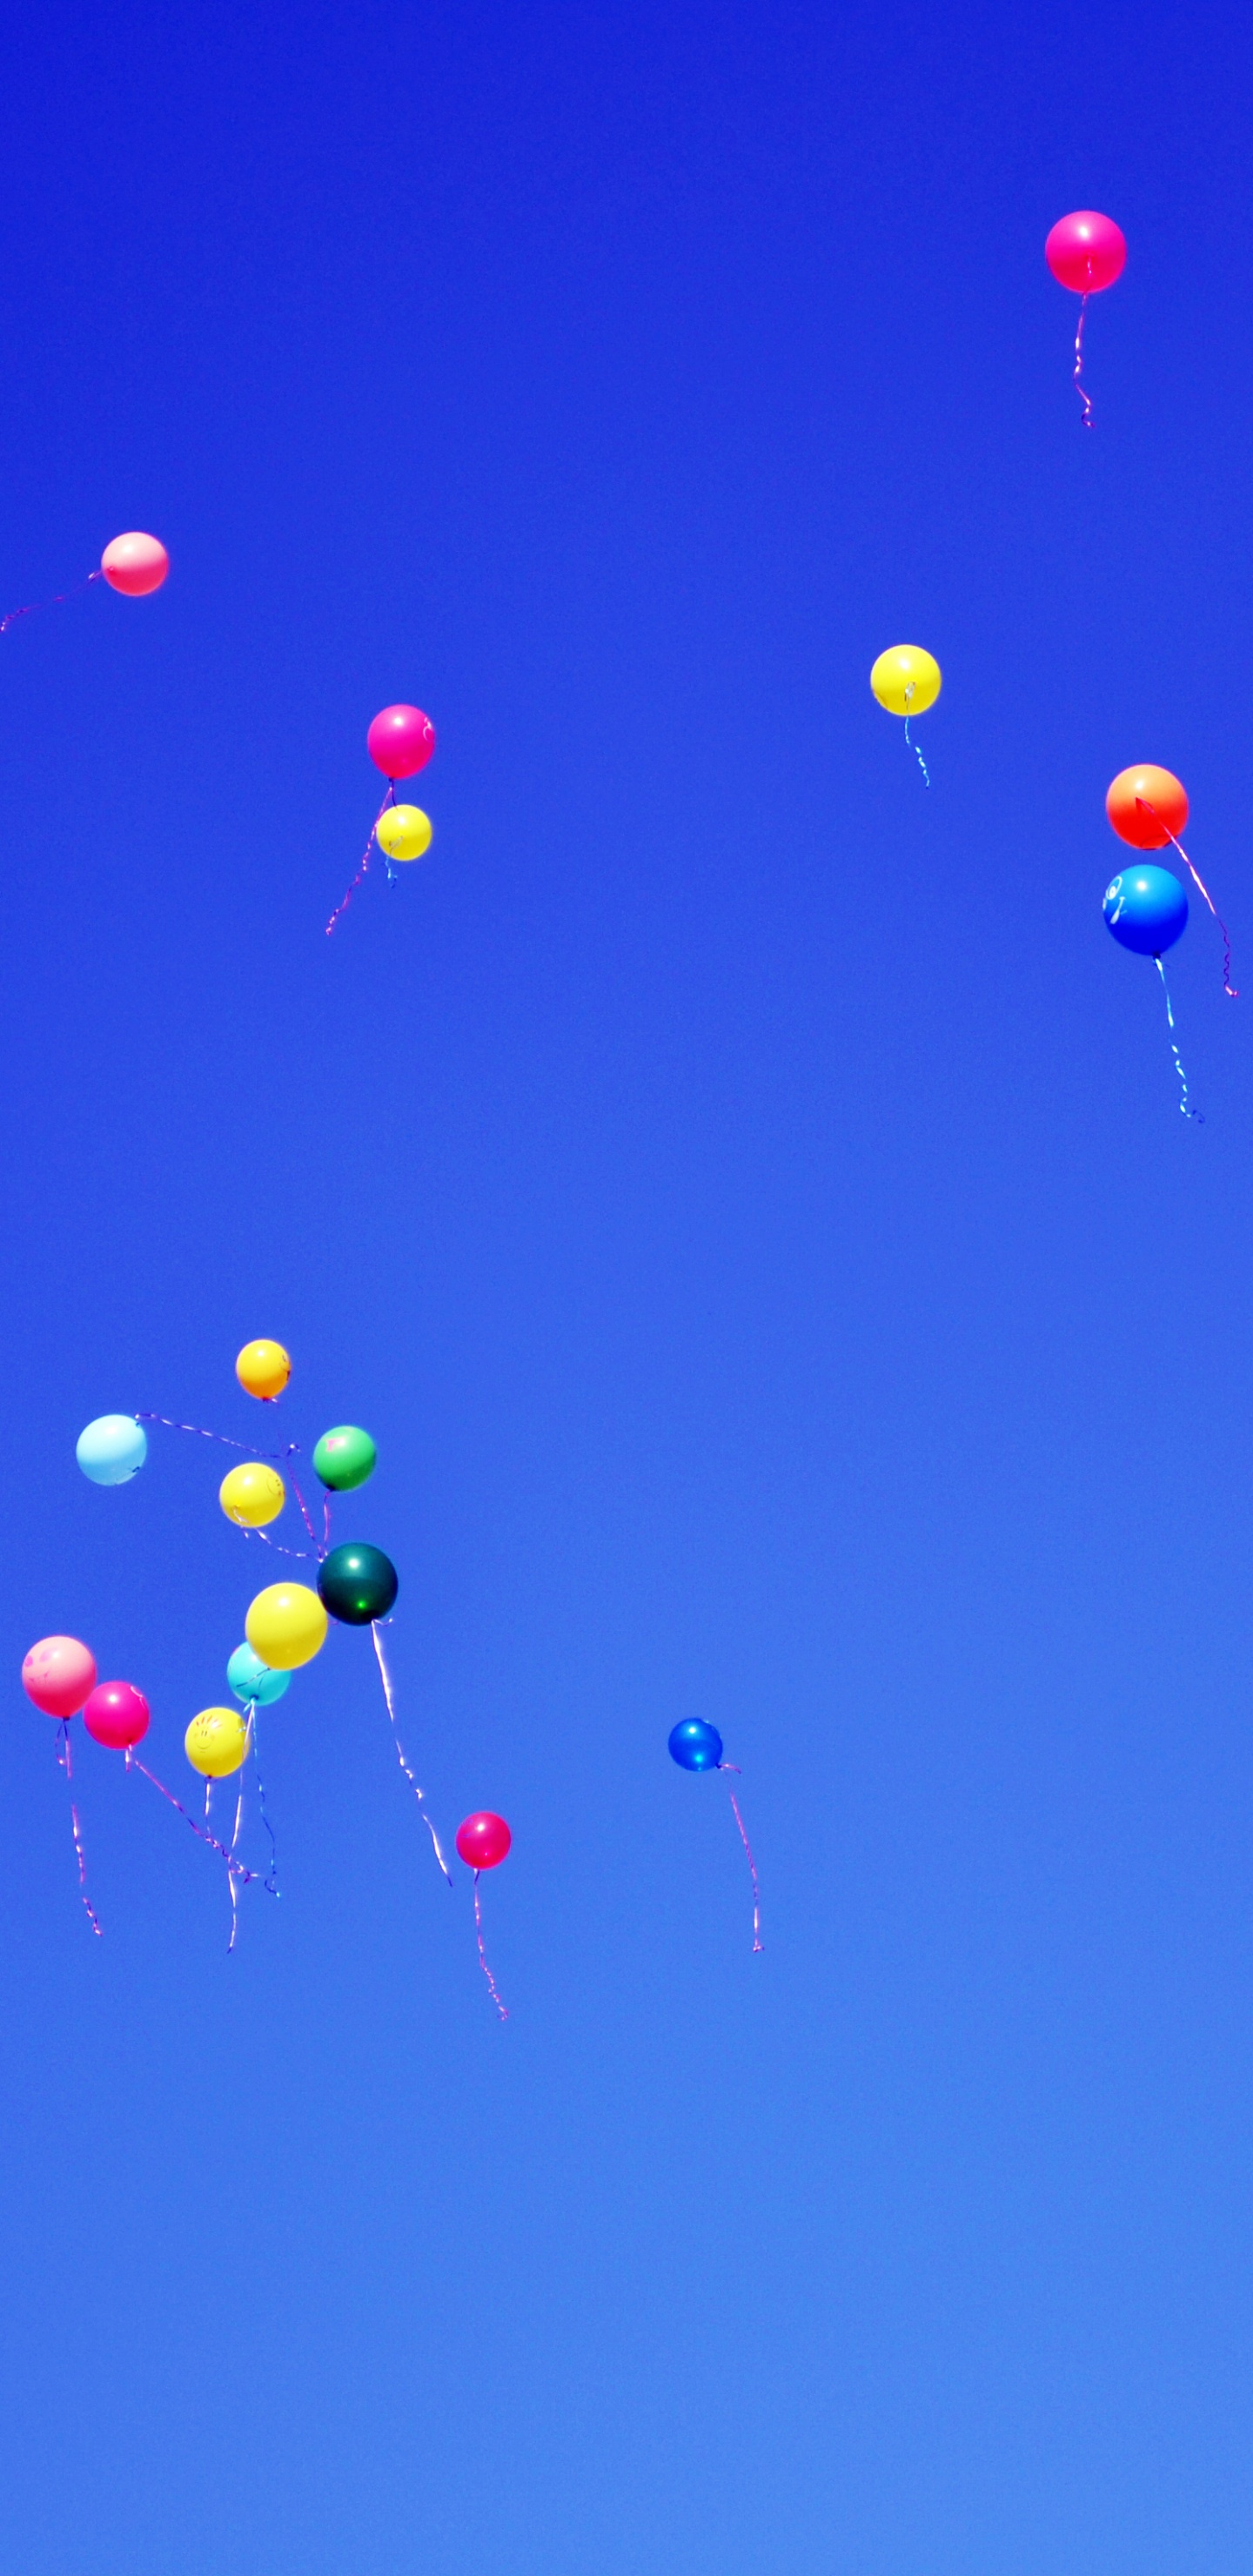 Red Blue and Yellow Balloons in The Sky. Wallpaper in 1440x2960 Resolution